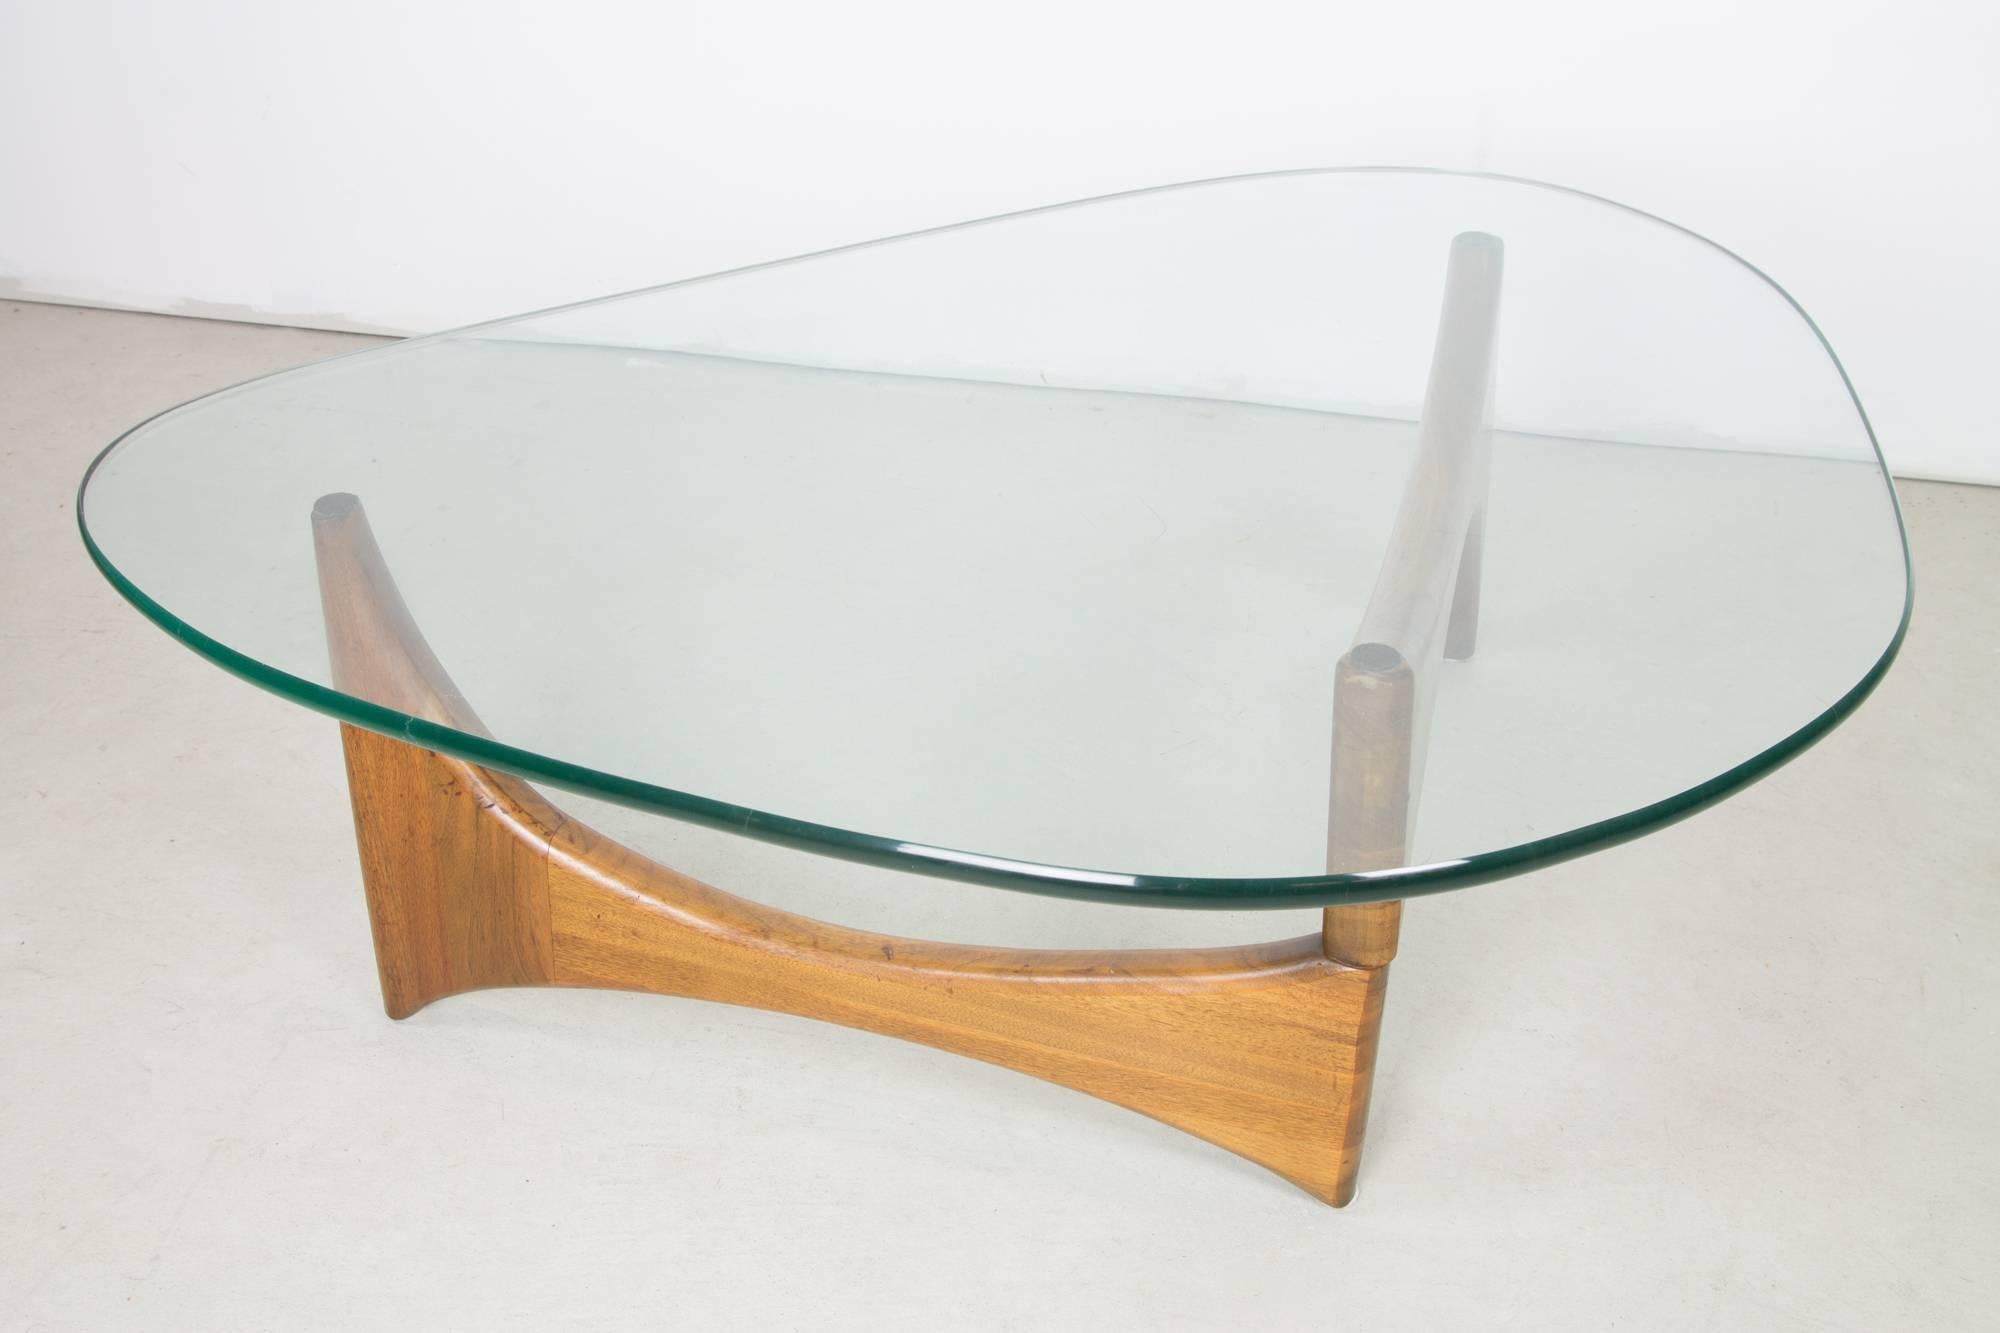 Stunning organic, sculptural coffee table in the style of Adrian Pearsall for Craft Associates, featuring a boomerang-form walnut base, supporting the original 3/4 inch free-form green glass top.